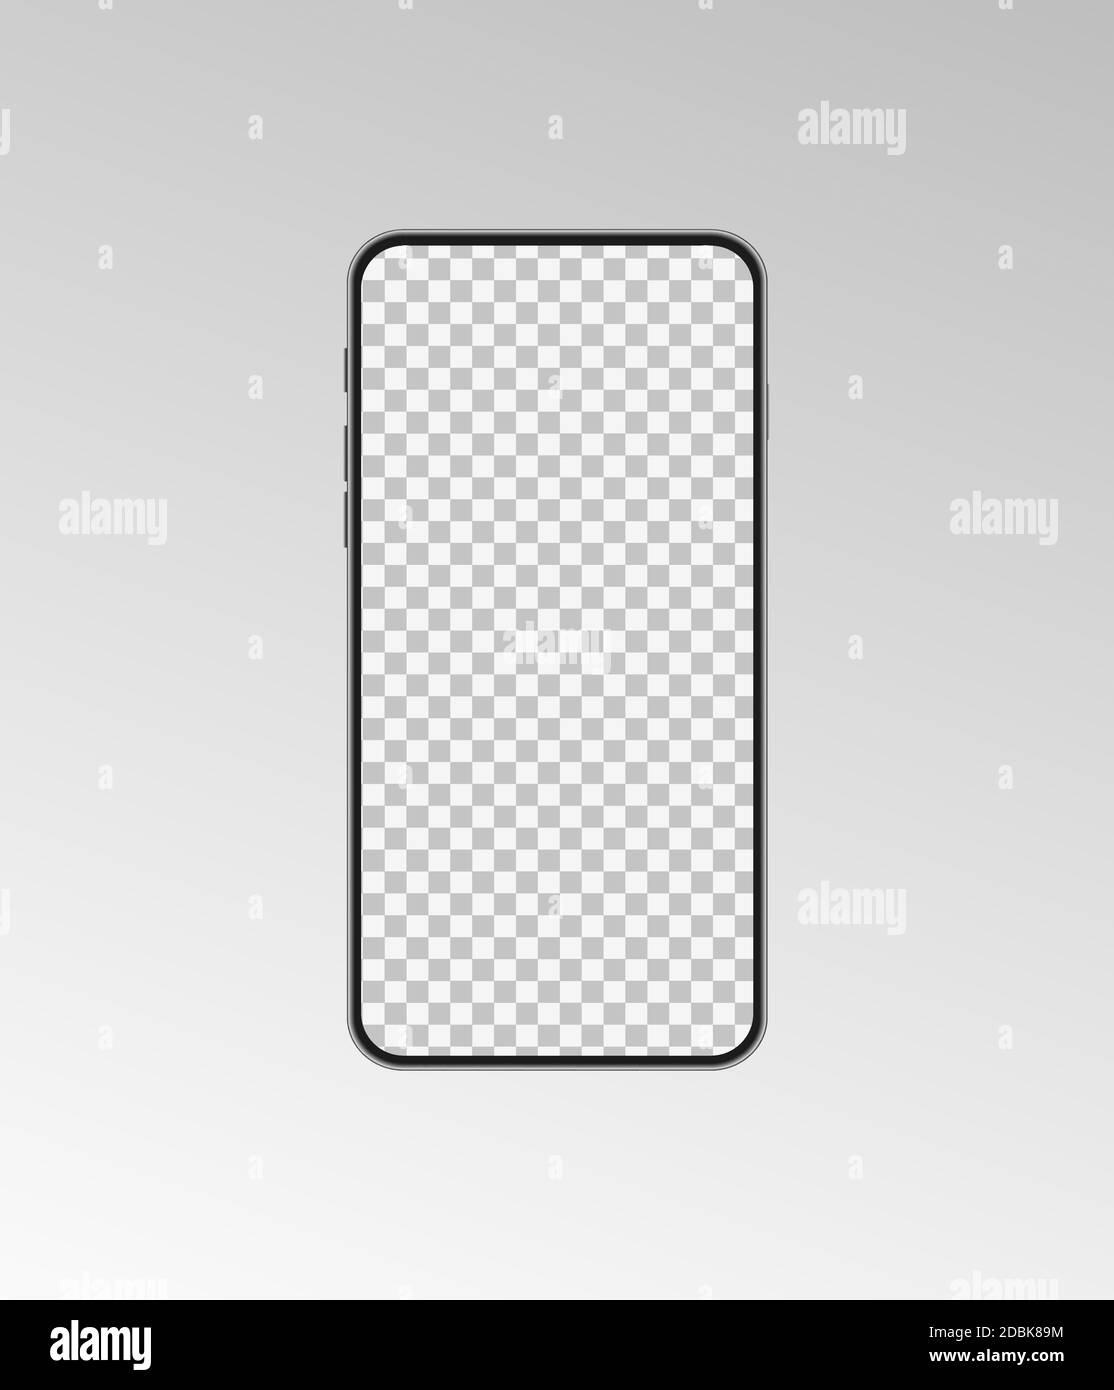 Phone mock up on grey background. Modern smartphone template with transparent background for social media, UI, poster, devices presentation. Vector Stock Vector